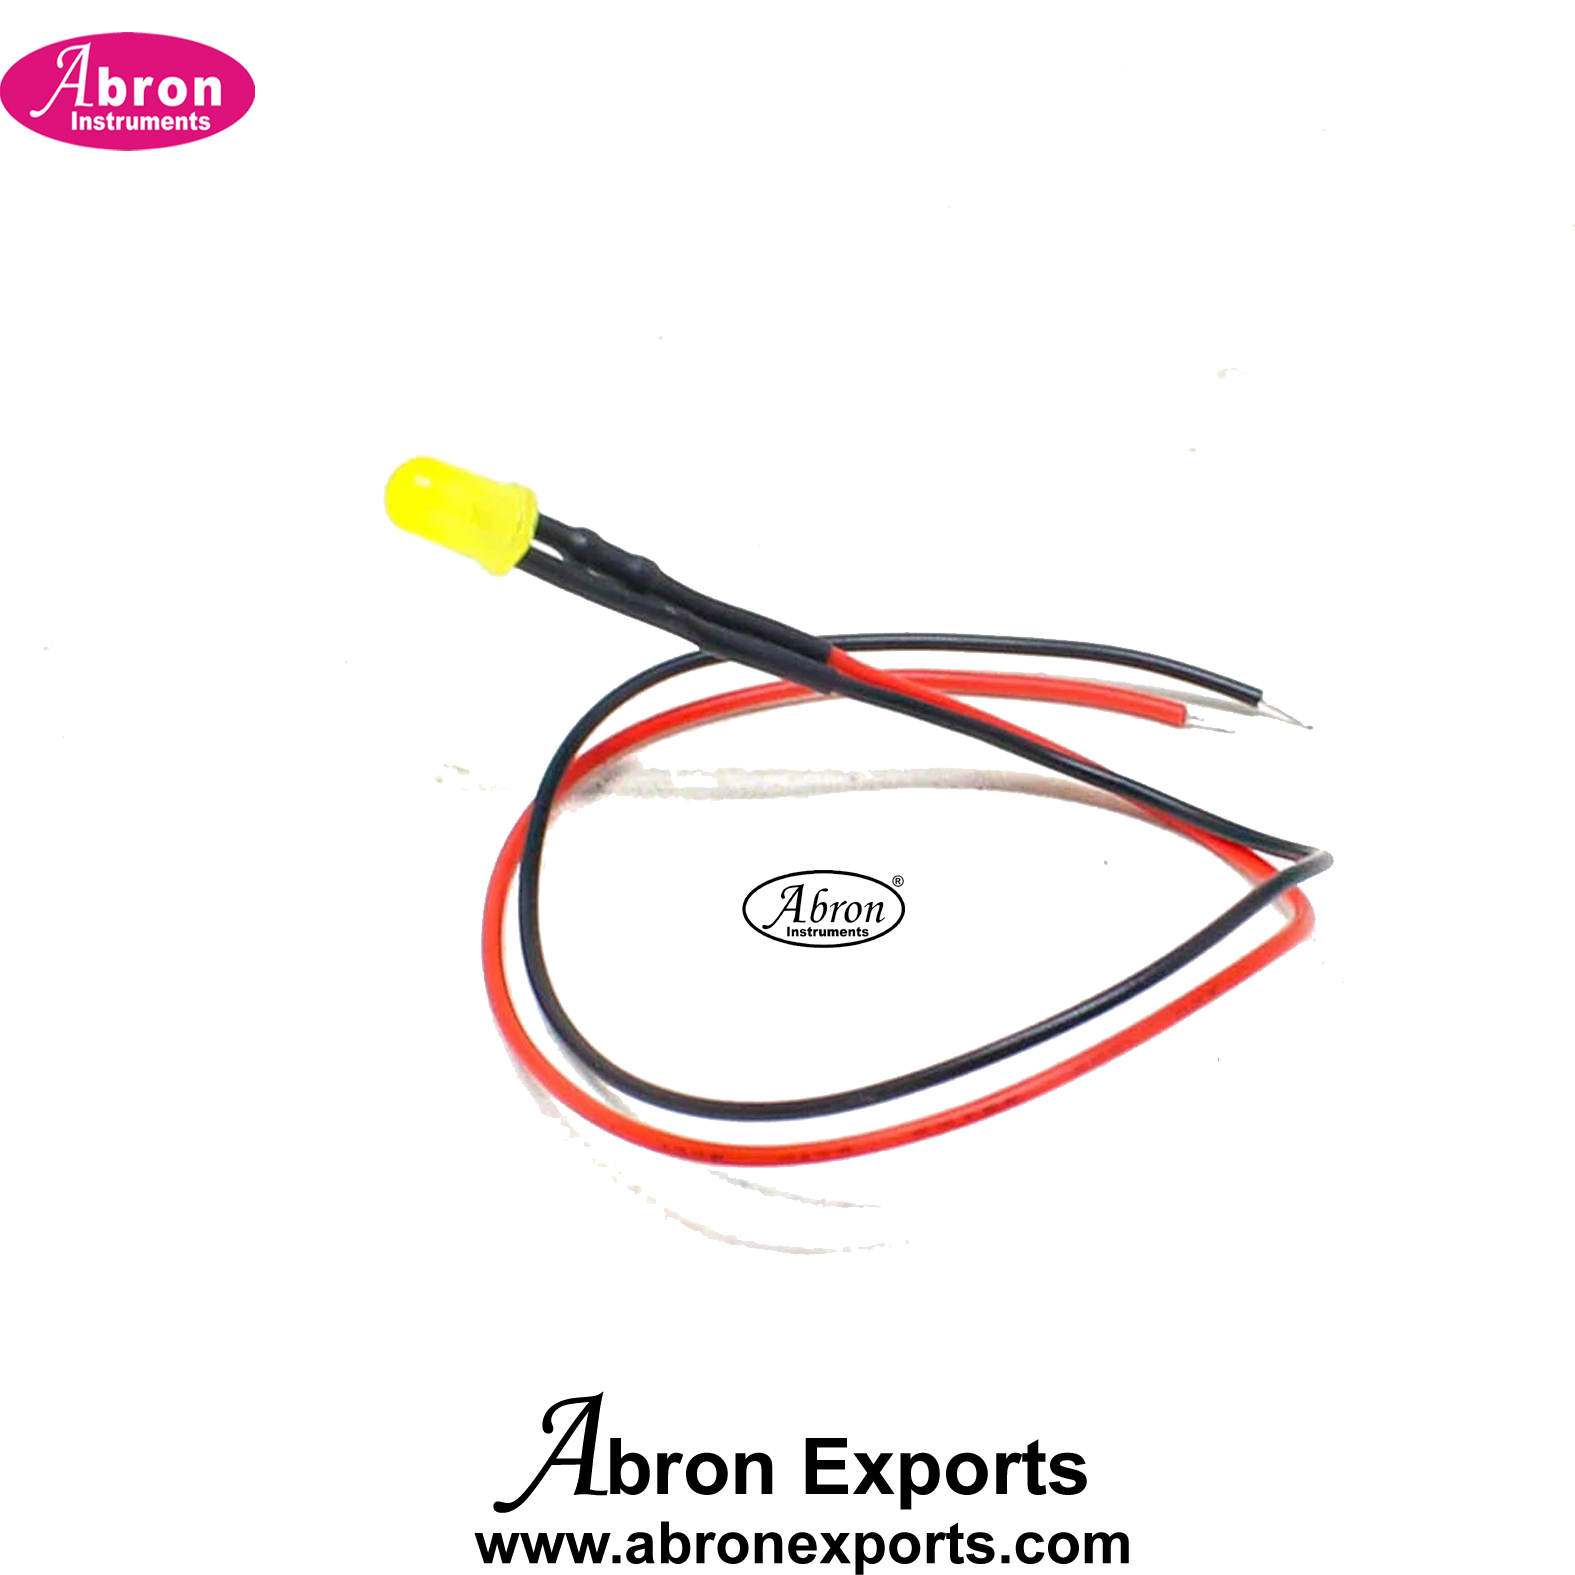 Electronic Component Loose Spare LED with suitable resistance and wire 5-9V or 12V Yellow Red etc Indicator Light With 20CM Wire Cable Pack of 10 Abron AE-1224LED9V  